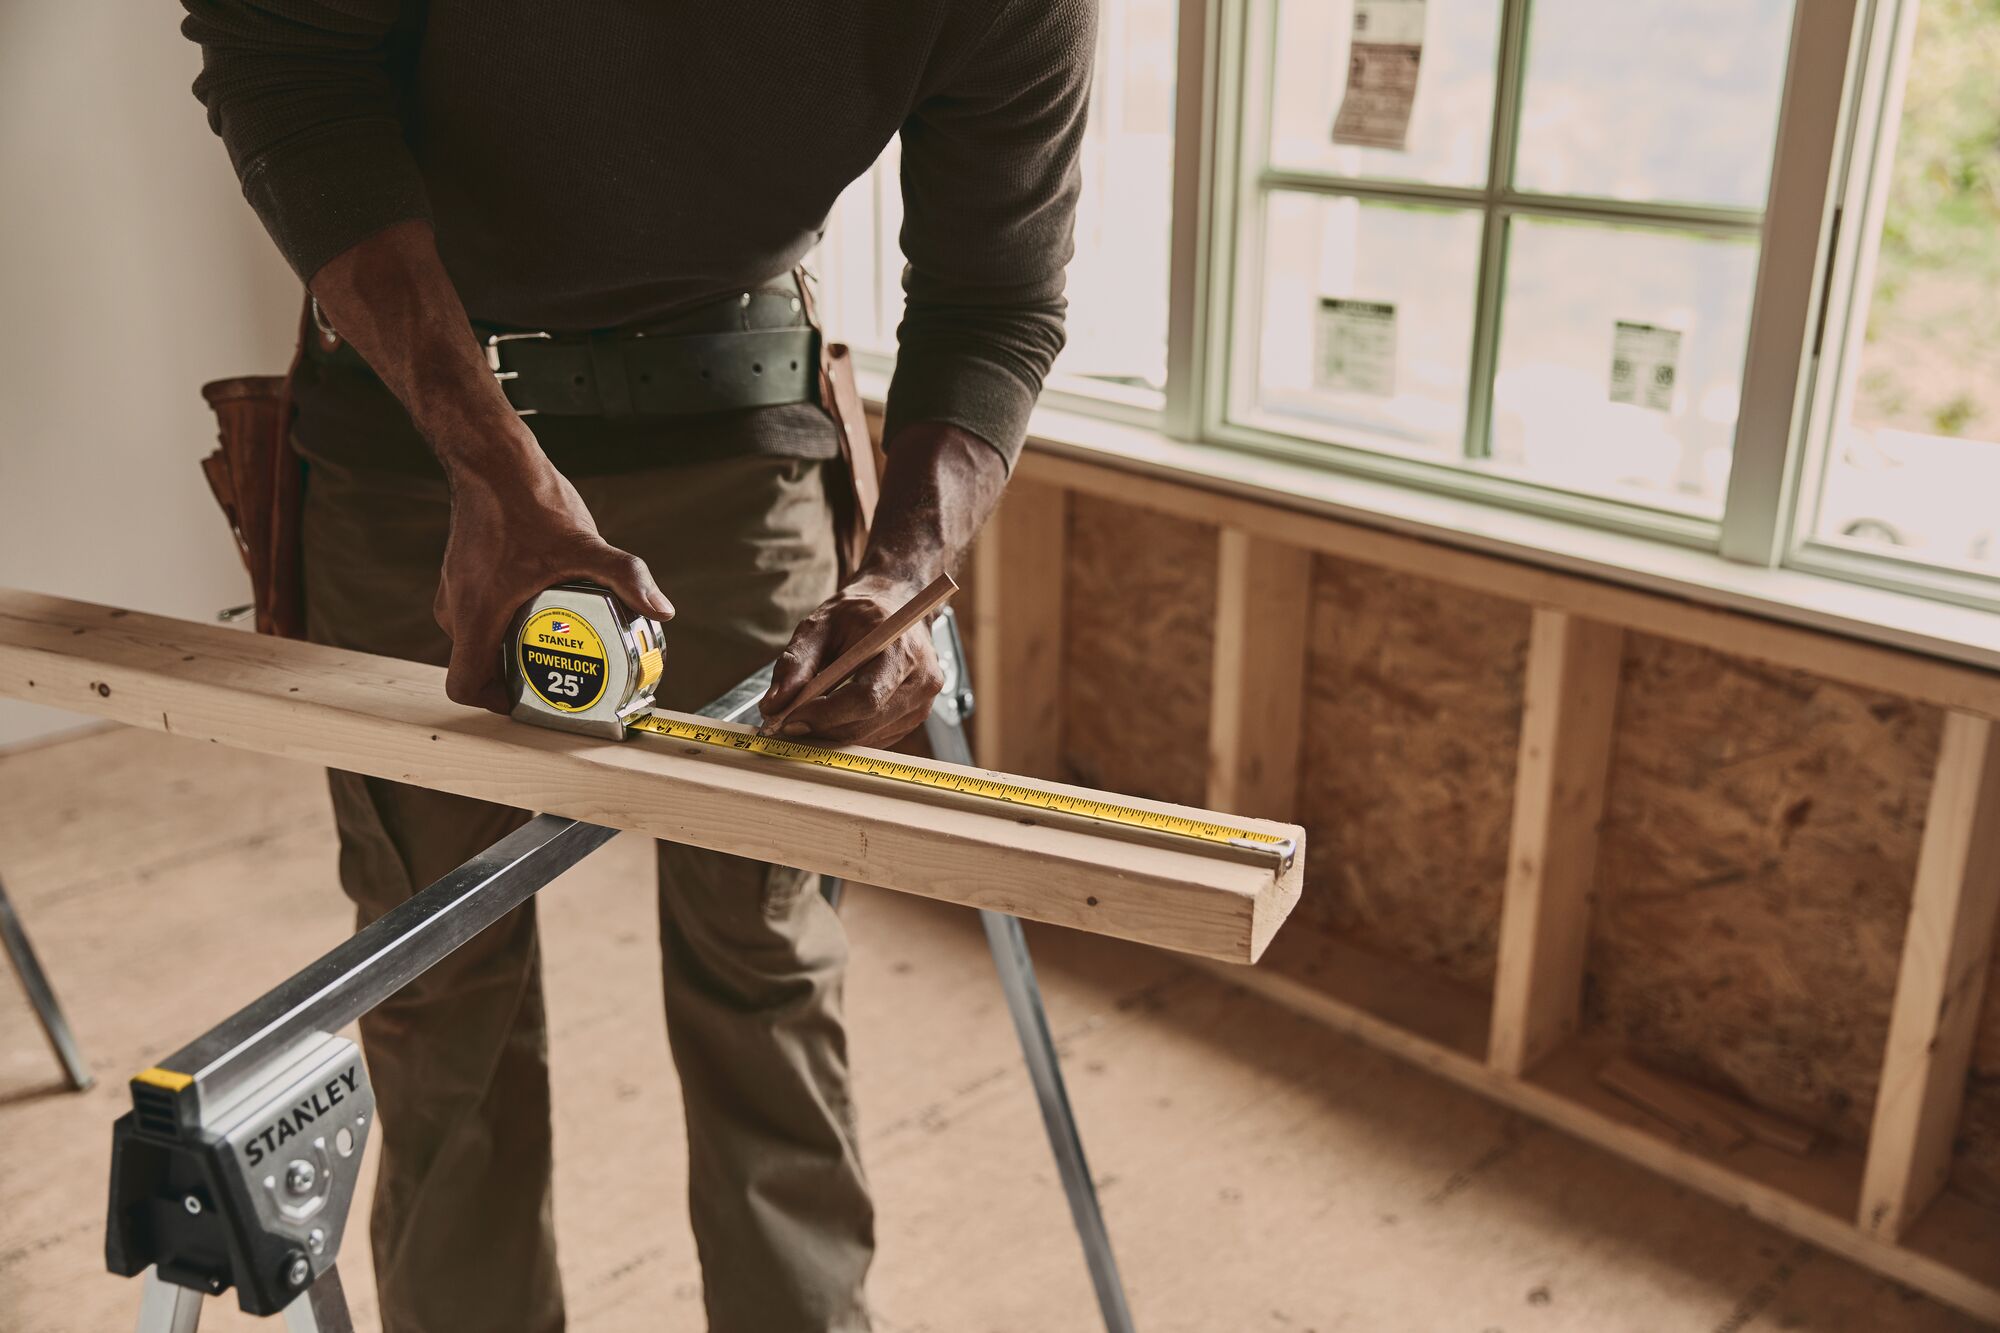 25 foot powerlock tape measure being used by a person to measure wood plank length.